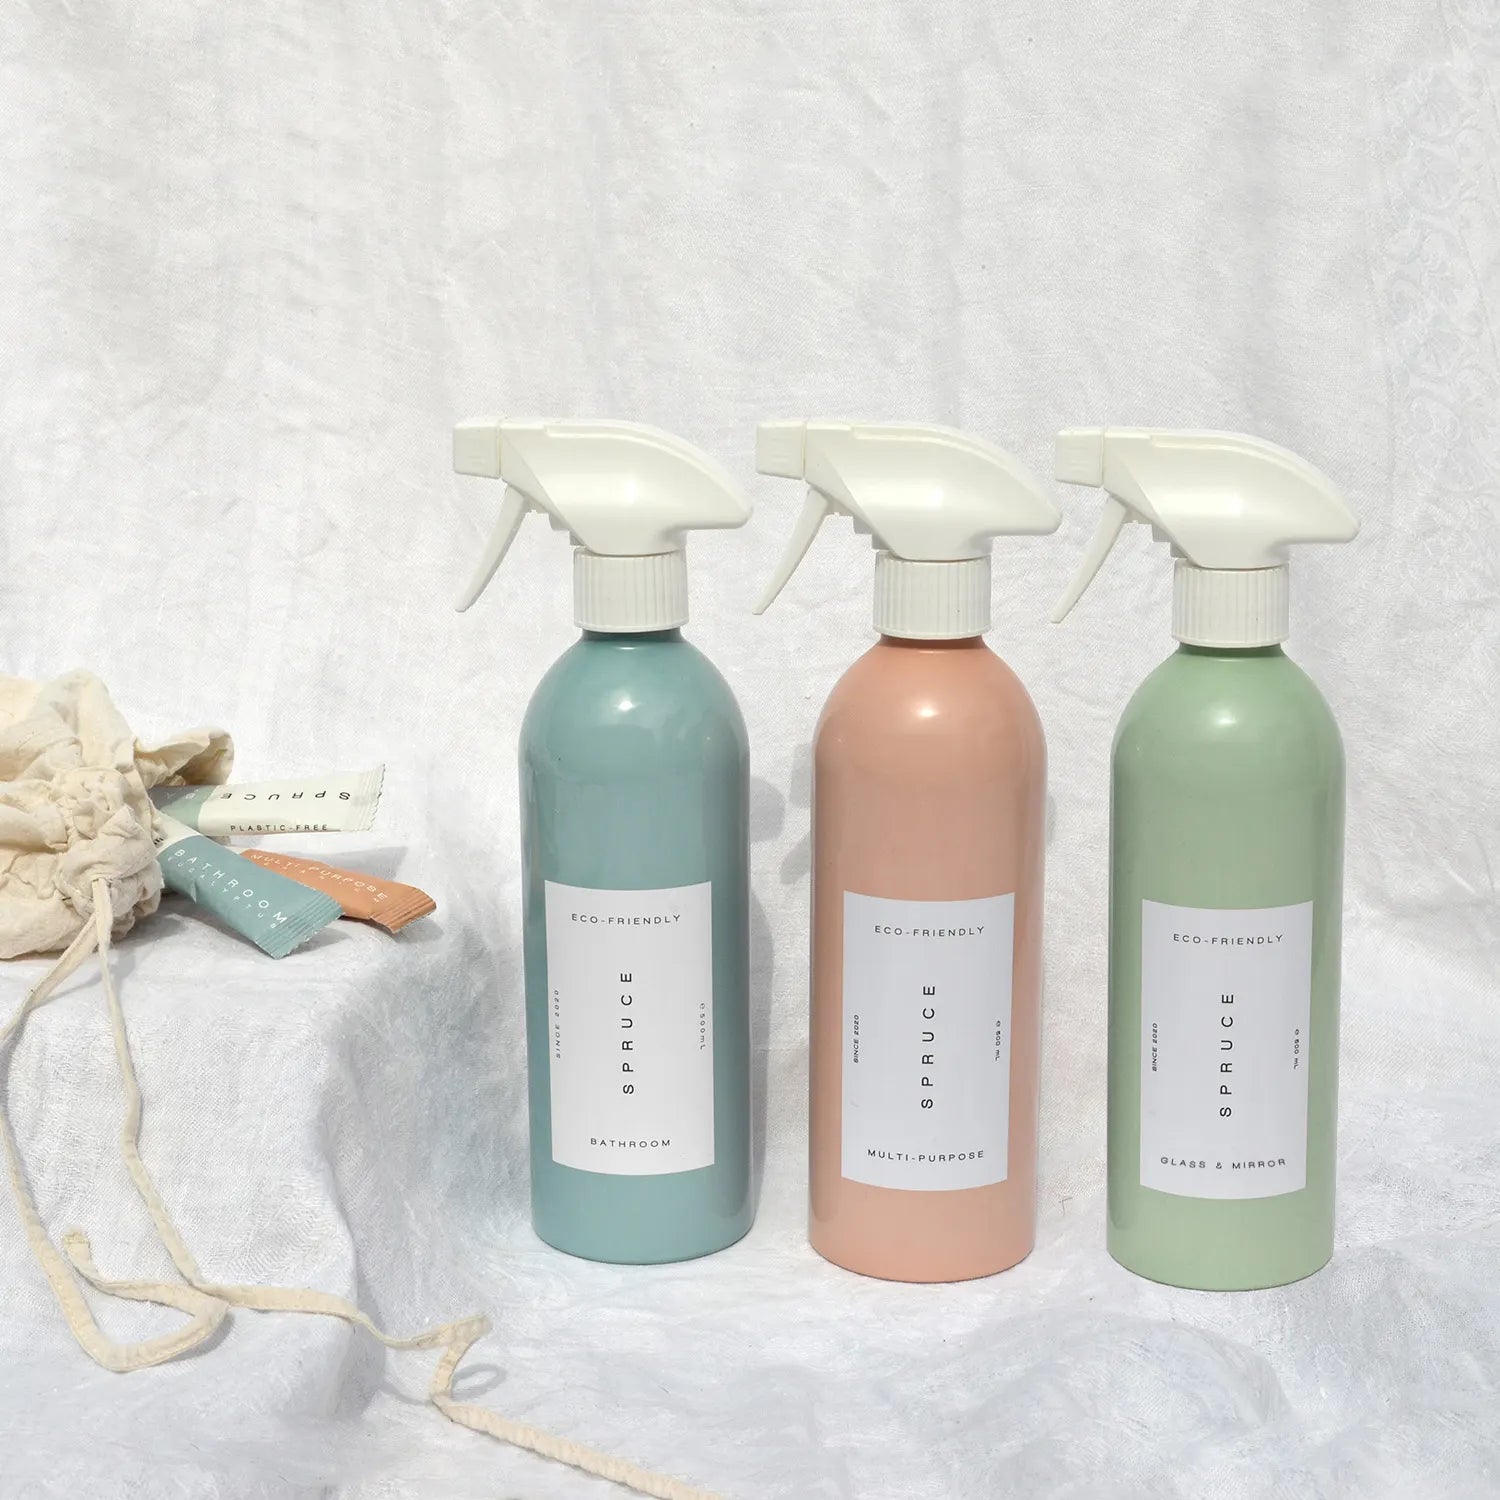 Cleaner-product packaging spruces up